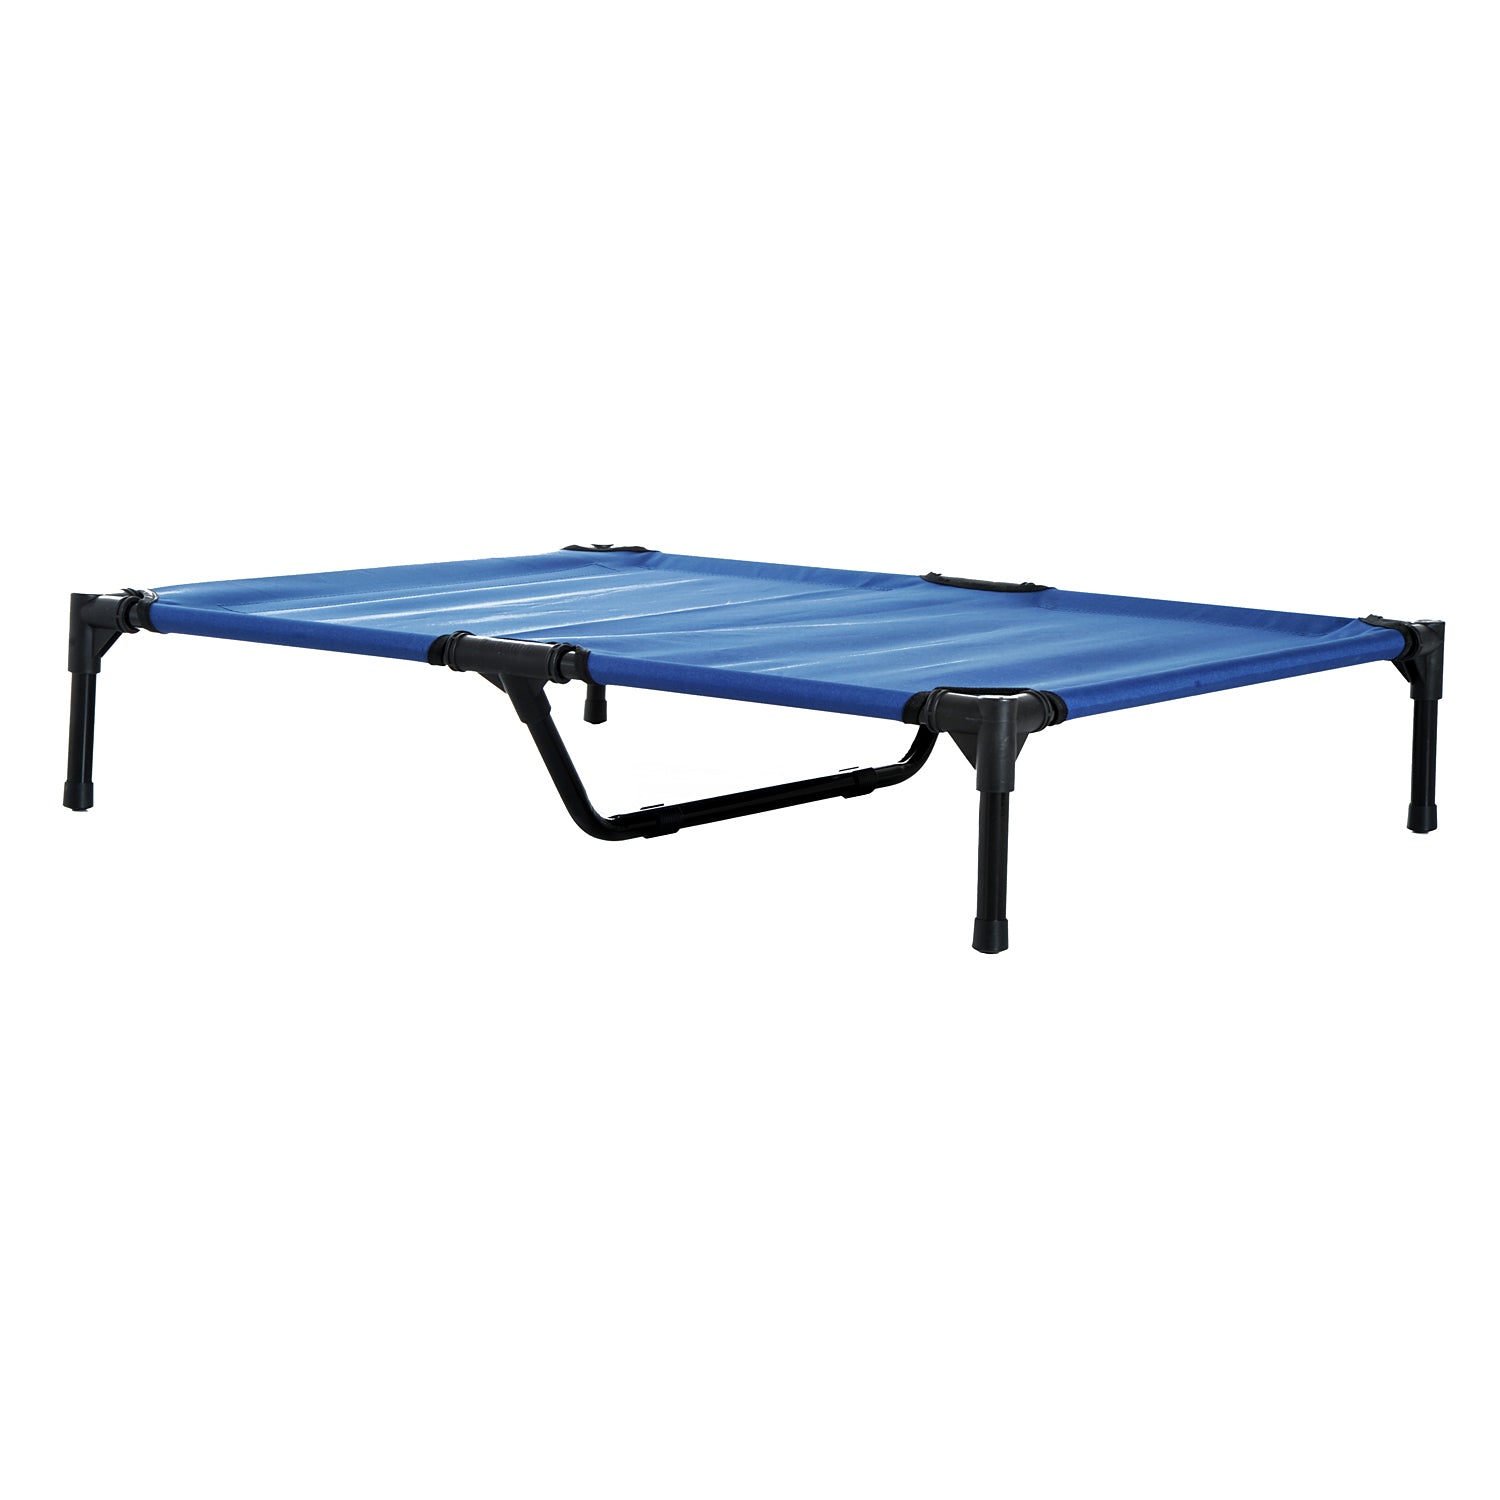 Large Dogs Portable Elevated Fabric Bed for Camping Outdoors Blue